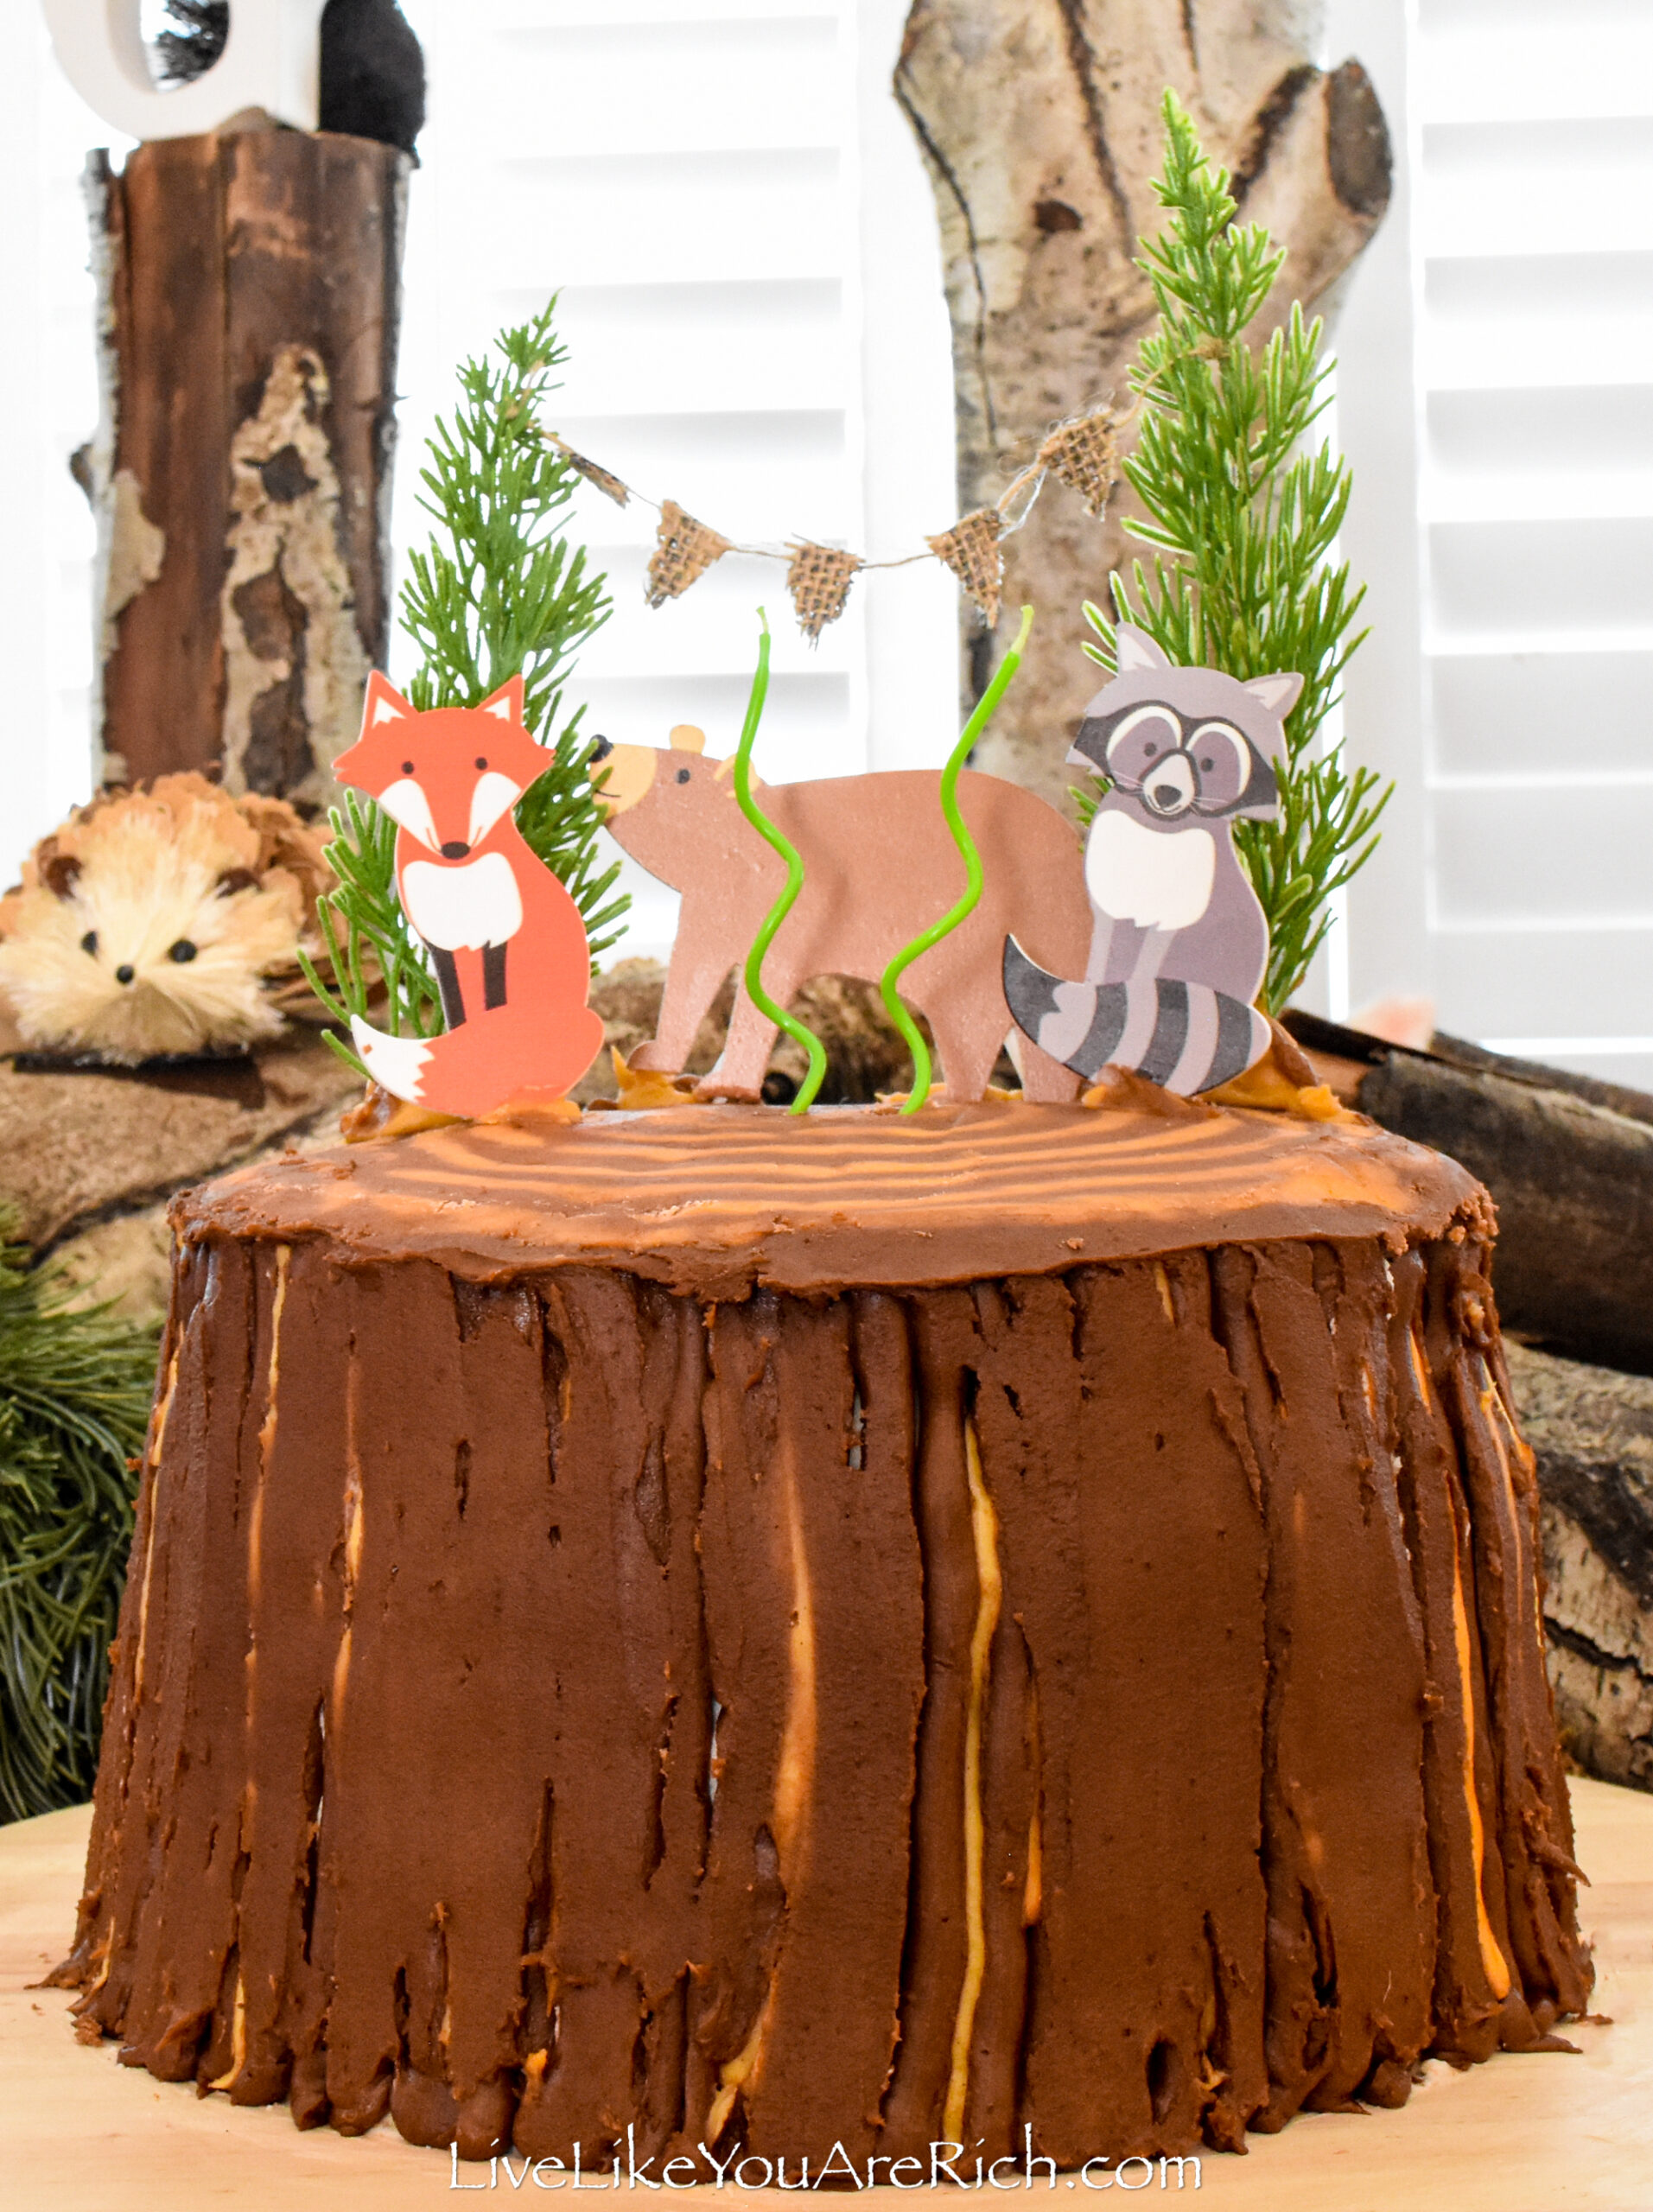 Tree Stump Cake for a Woodland Birthday Party